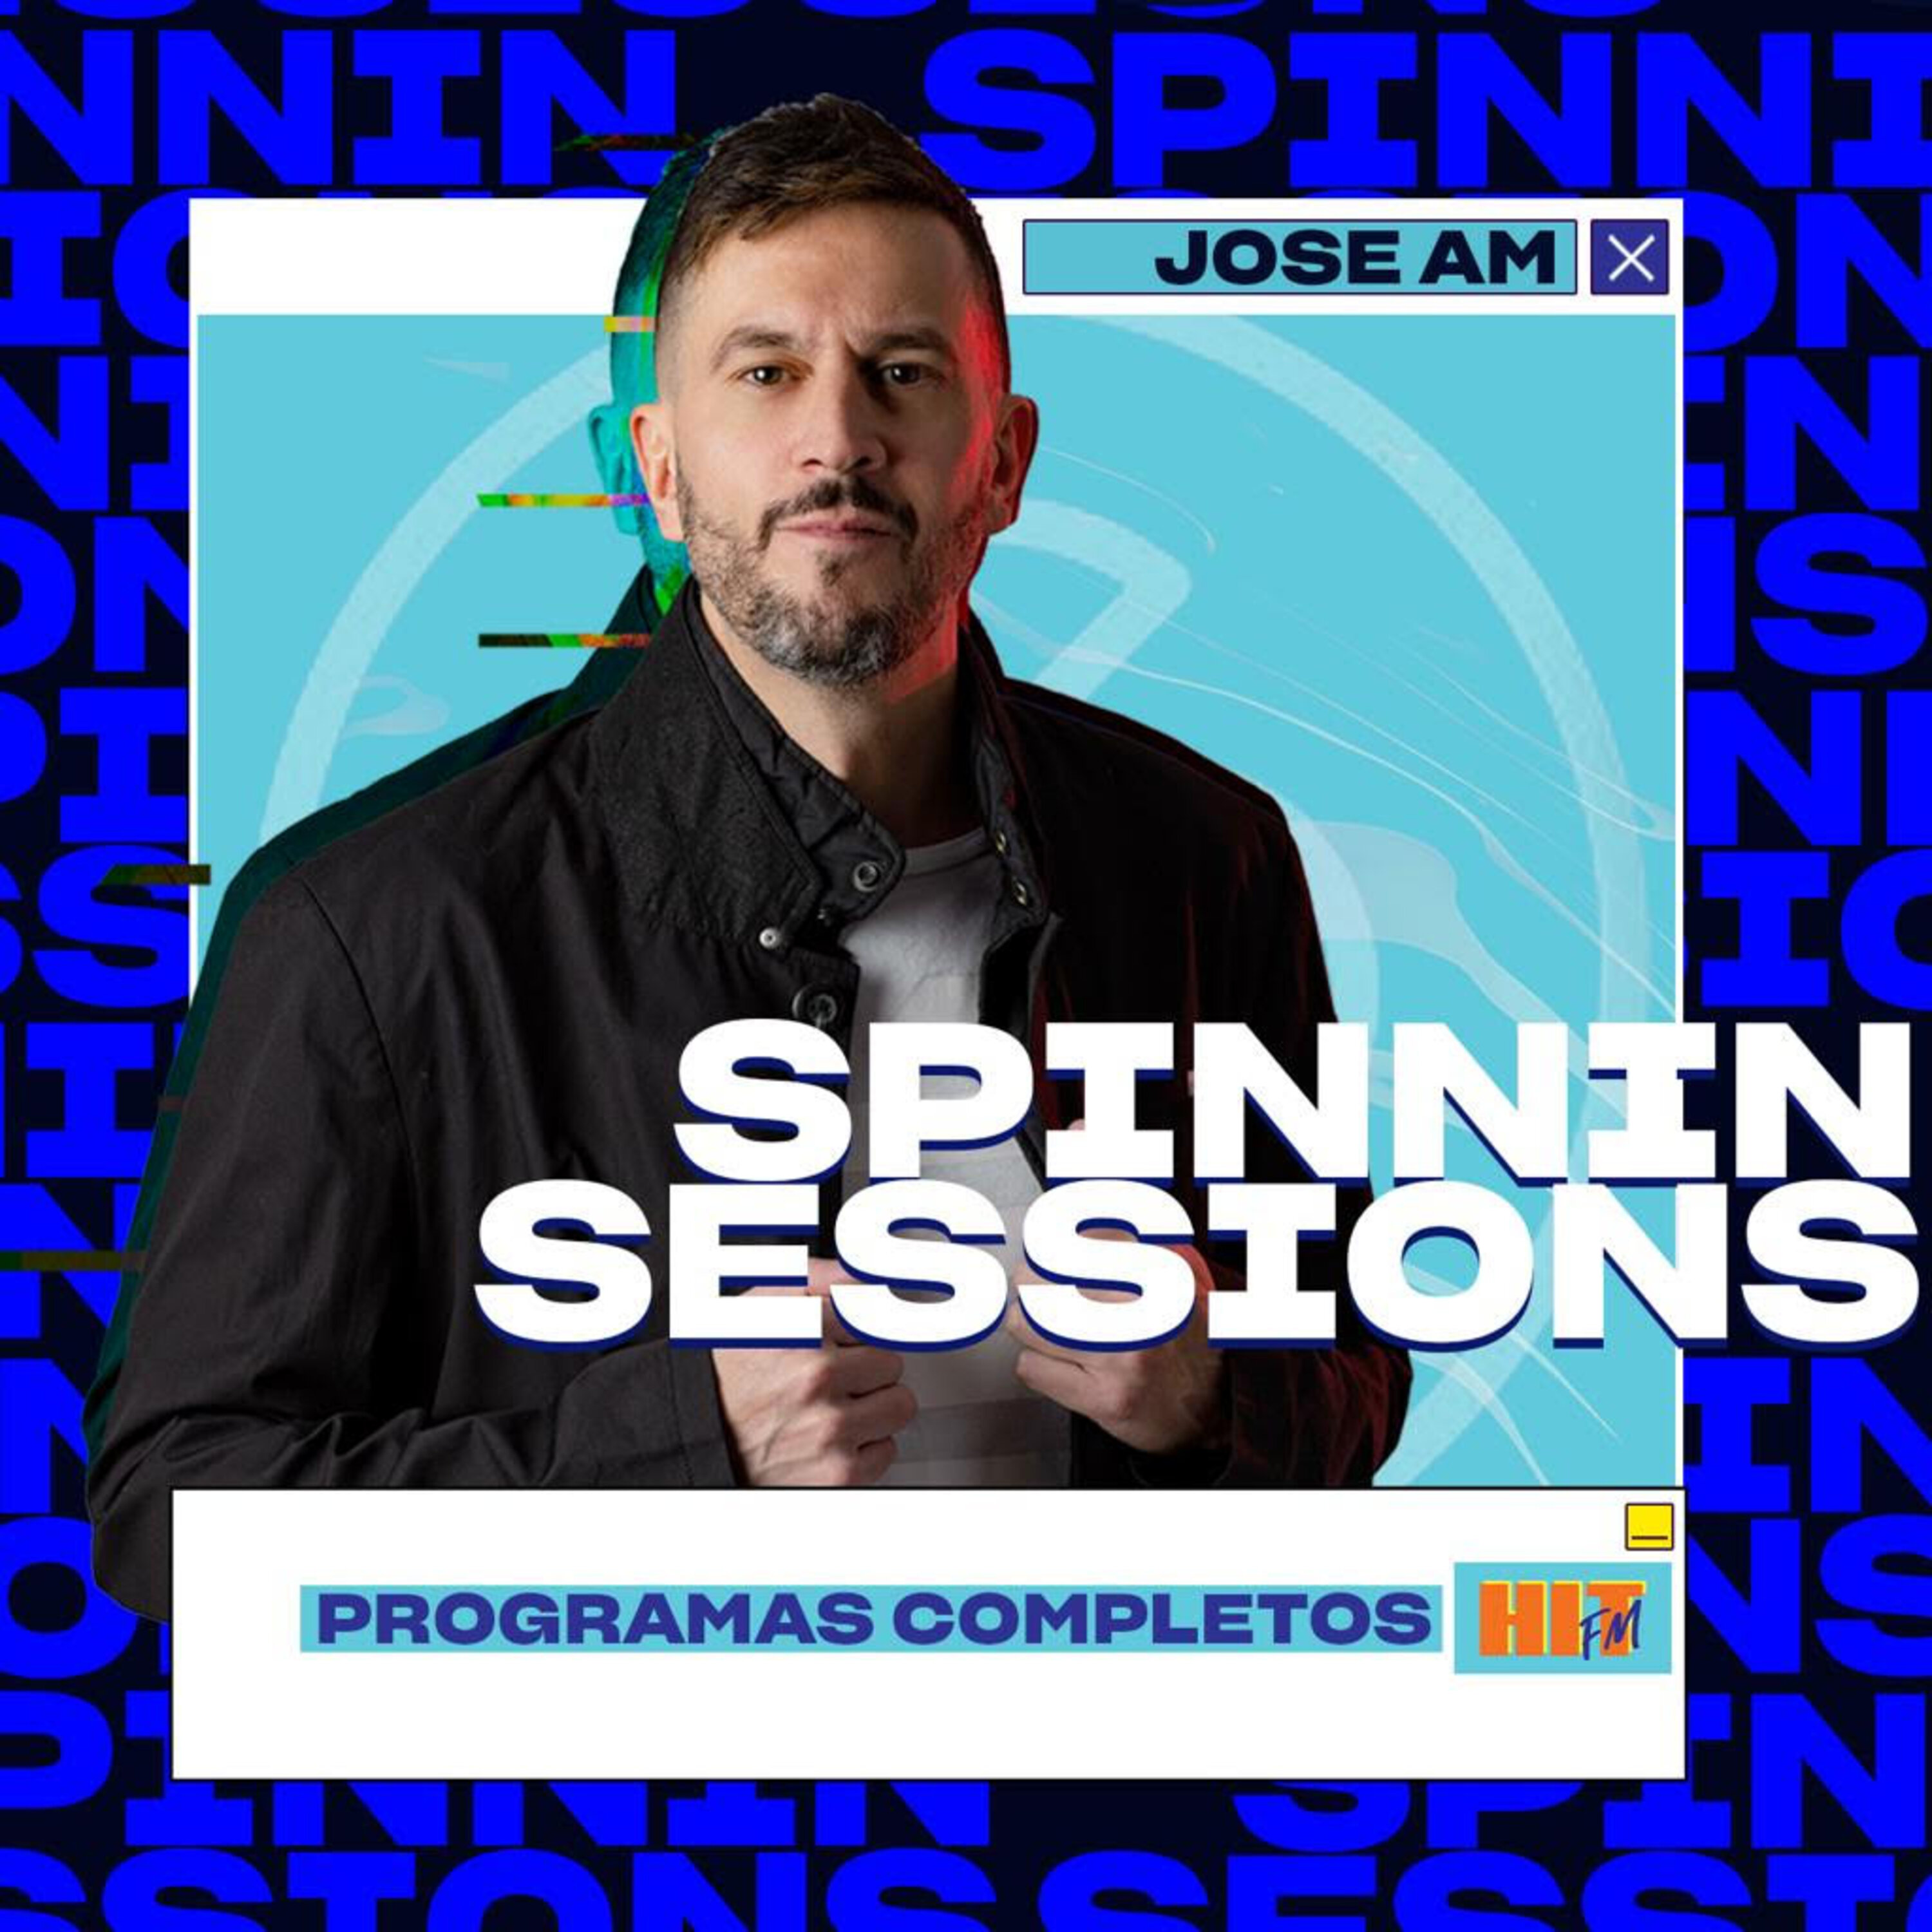 Spinnin Sessions con Jose AM (03/01/2022)